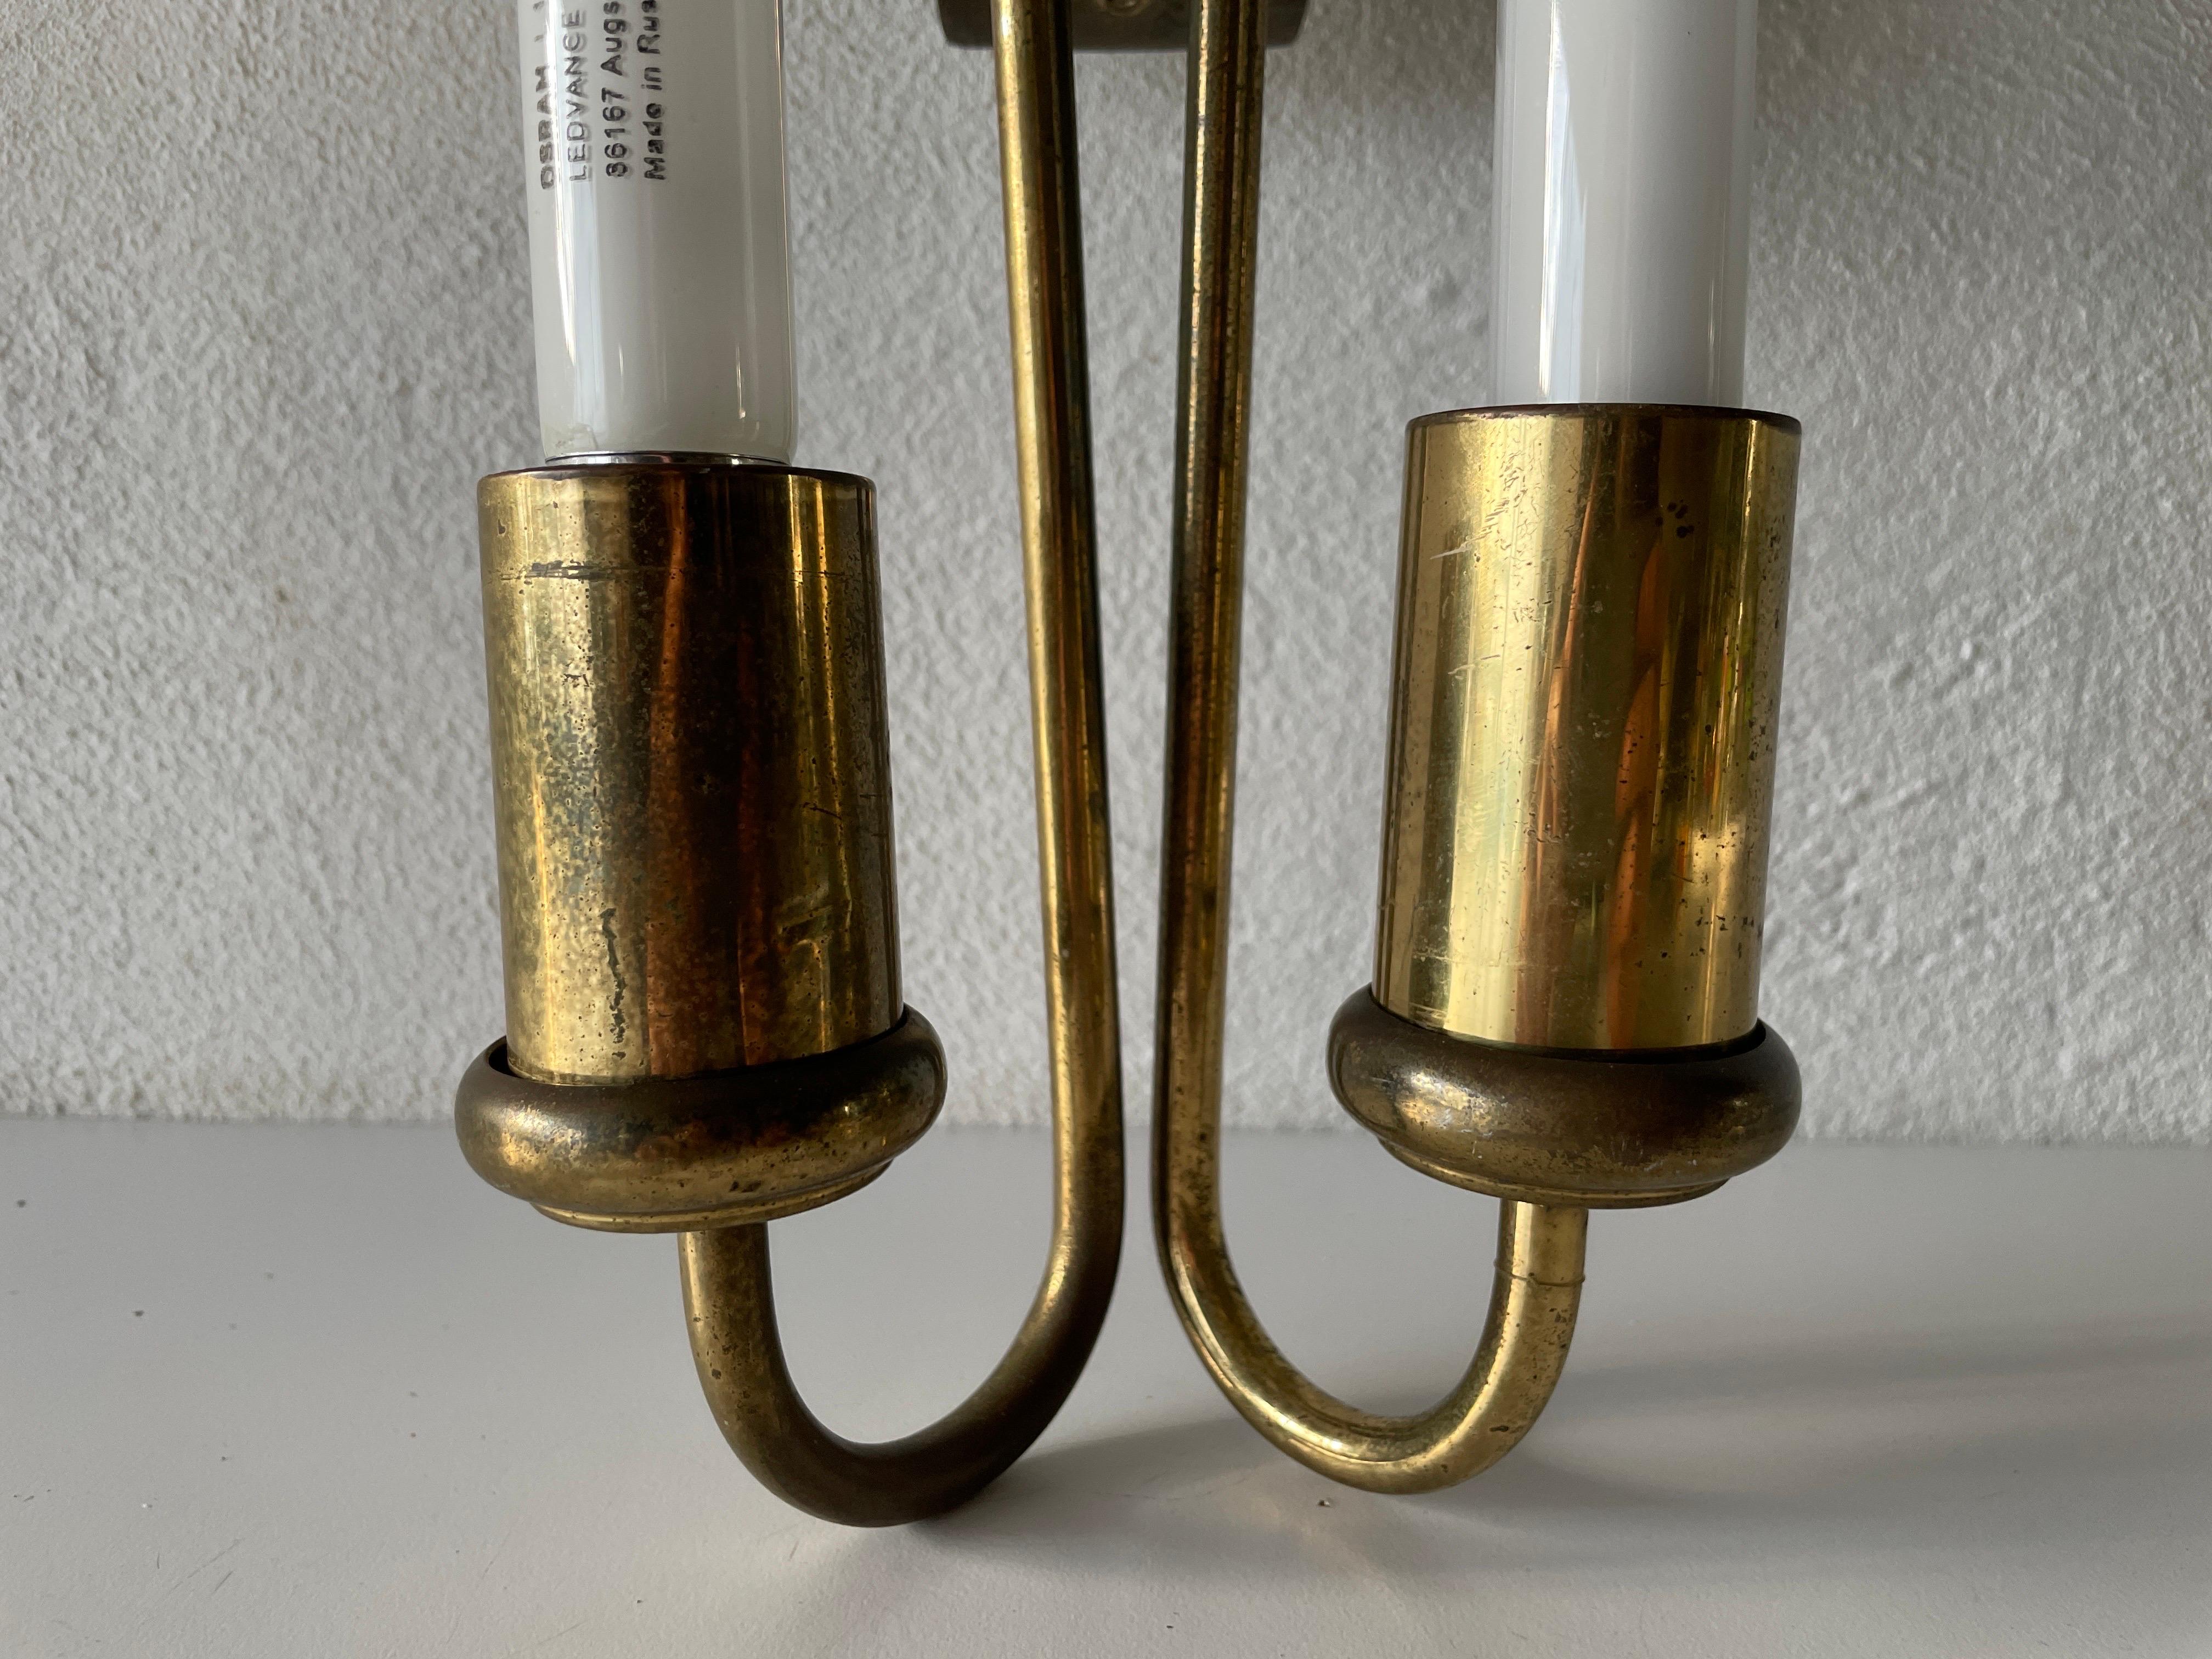 Art Deco Brass Industrial Cinema Sconce with Fluorescent Tubes, 1930s, Germany For Sale 1